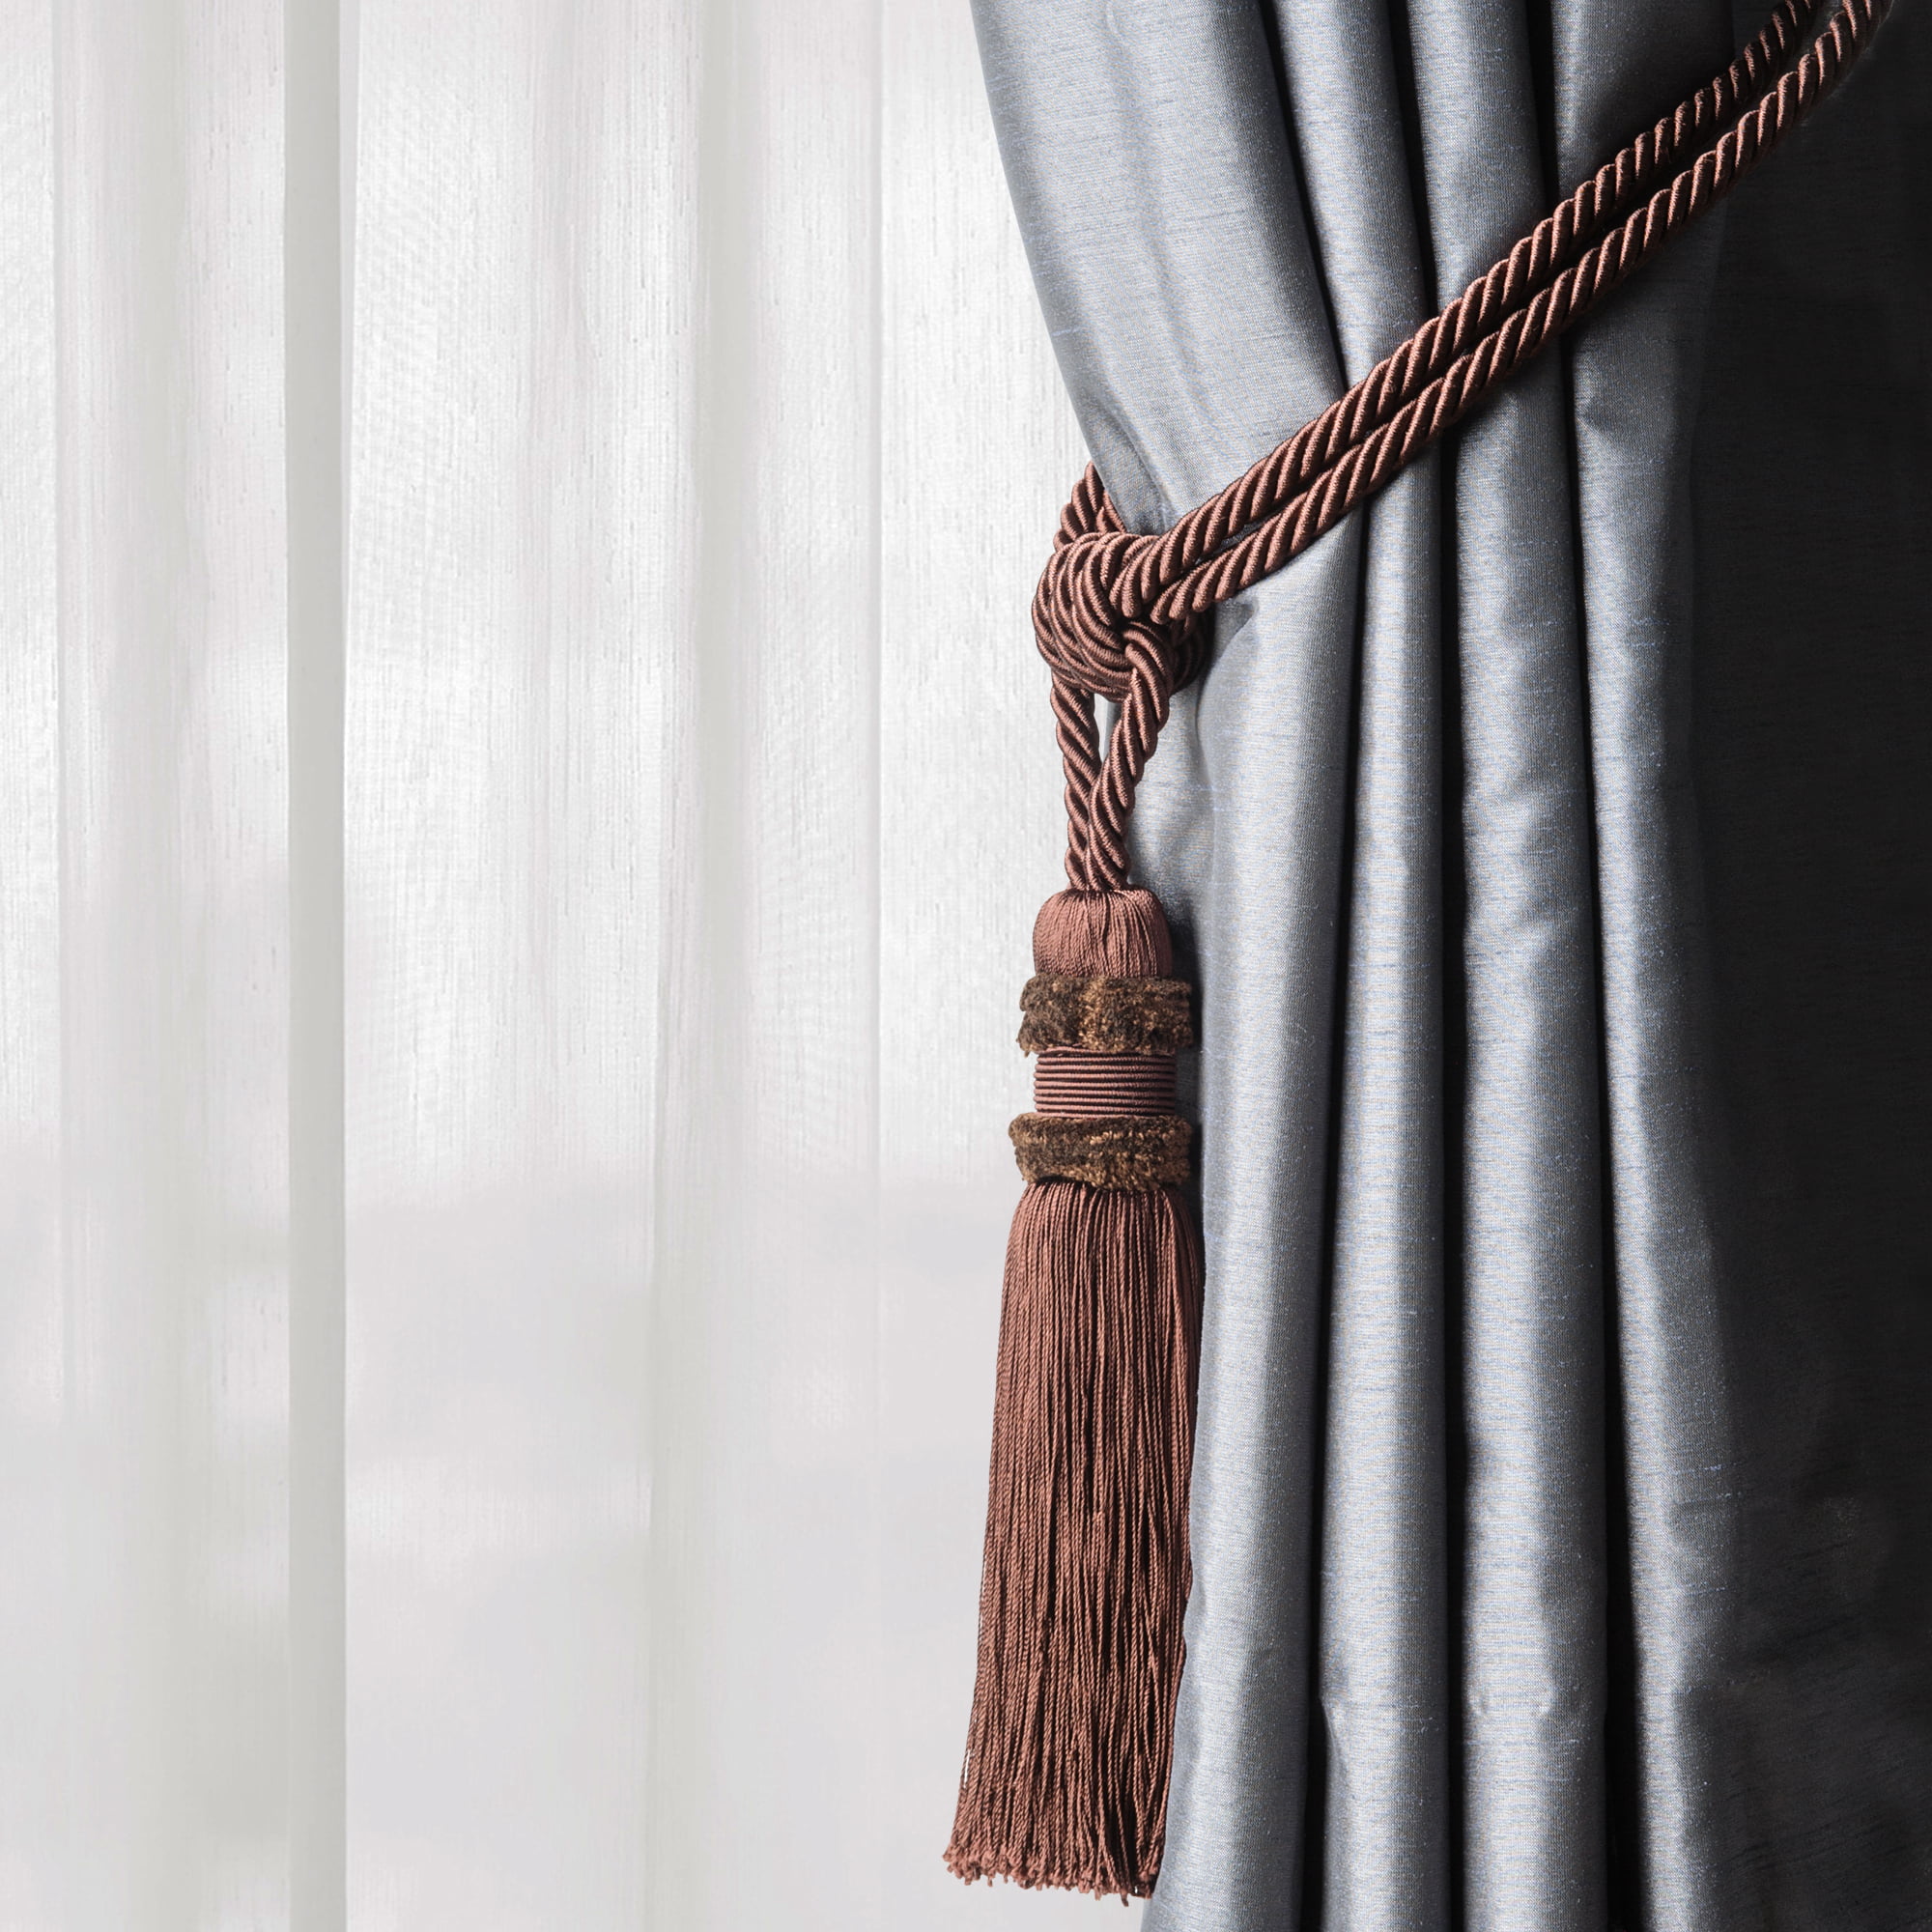 Curtain & Chair Tie Back-Adjustable 36"spread with 7"tassel in 9 Bright colors. 